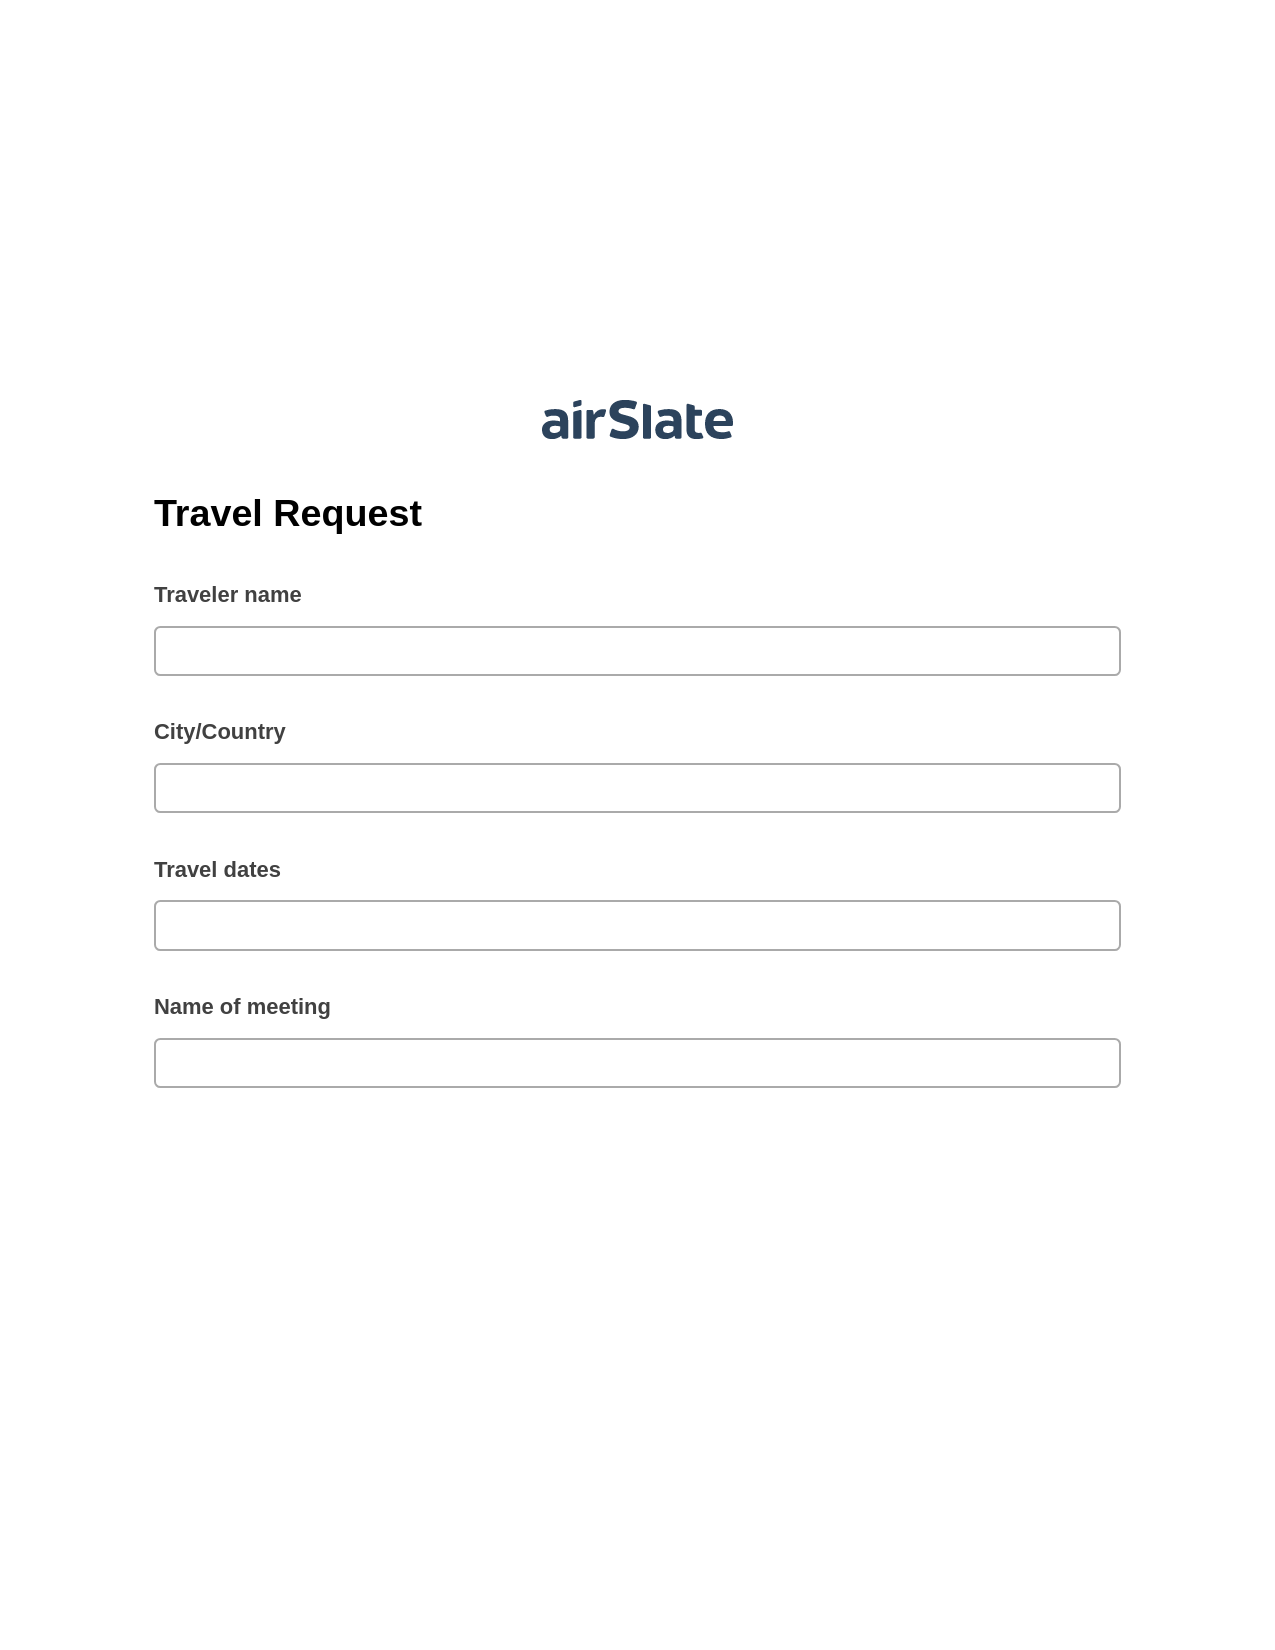 Travel Request Pre-fill from Litmos bot, Lock the slate bot, Export to Excel 365 Bot